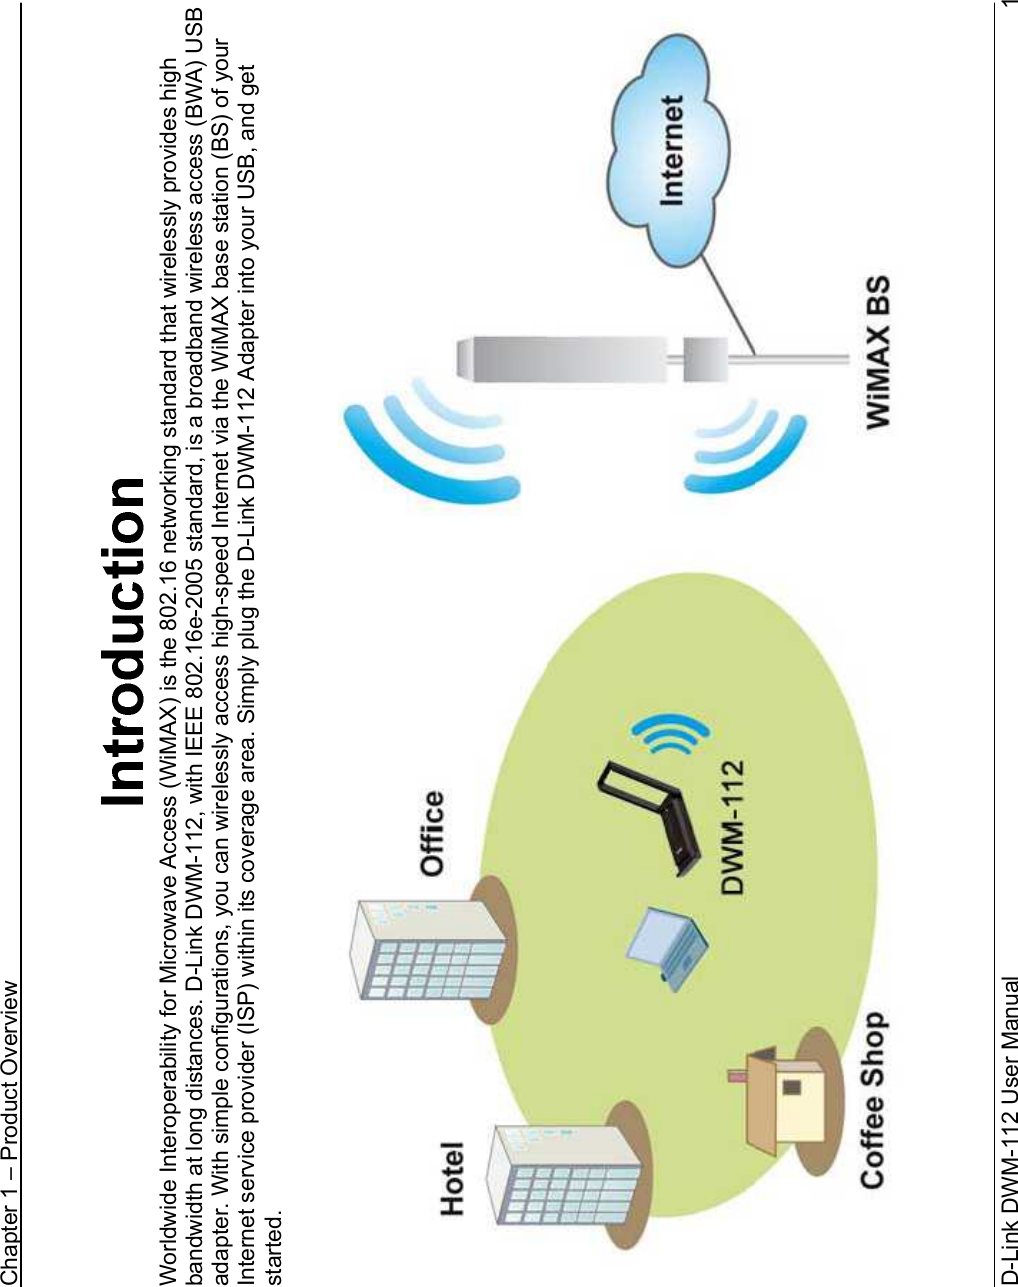 Chapter 1 – Product OverviewD-Link DWM-112 User Manual   1Worldwide Interoperability for Microwave Access (WiMAX) is the 802.16 networking standard that wirelessly provides high bandwidth at long distances. D-Link DWM-112, with IEEE 802.16e-2005 standard, is a broadband wireless access (BWA) USB adapter. With simple configurations, you can wirelessly access high-speed Internet via the WiMAX base station (BS) of your Internet service provider (ISP) within its coverage area. Simply plug the D-Link DWM-112 Adapter into your USB, and get started.